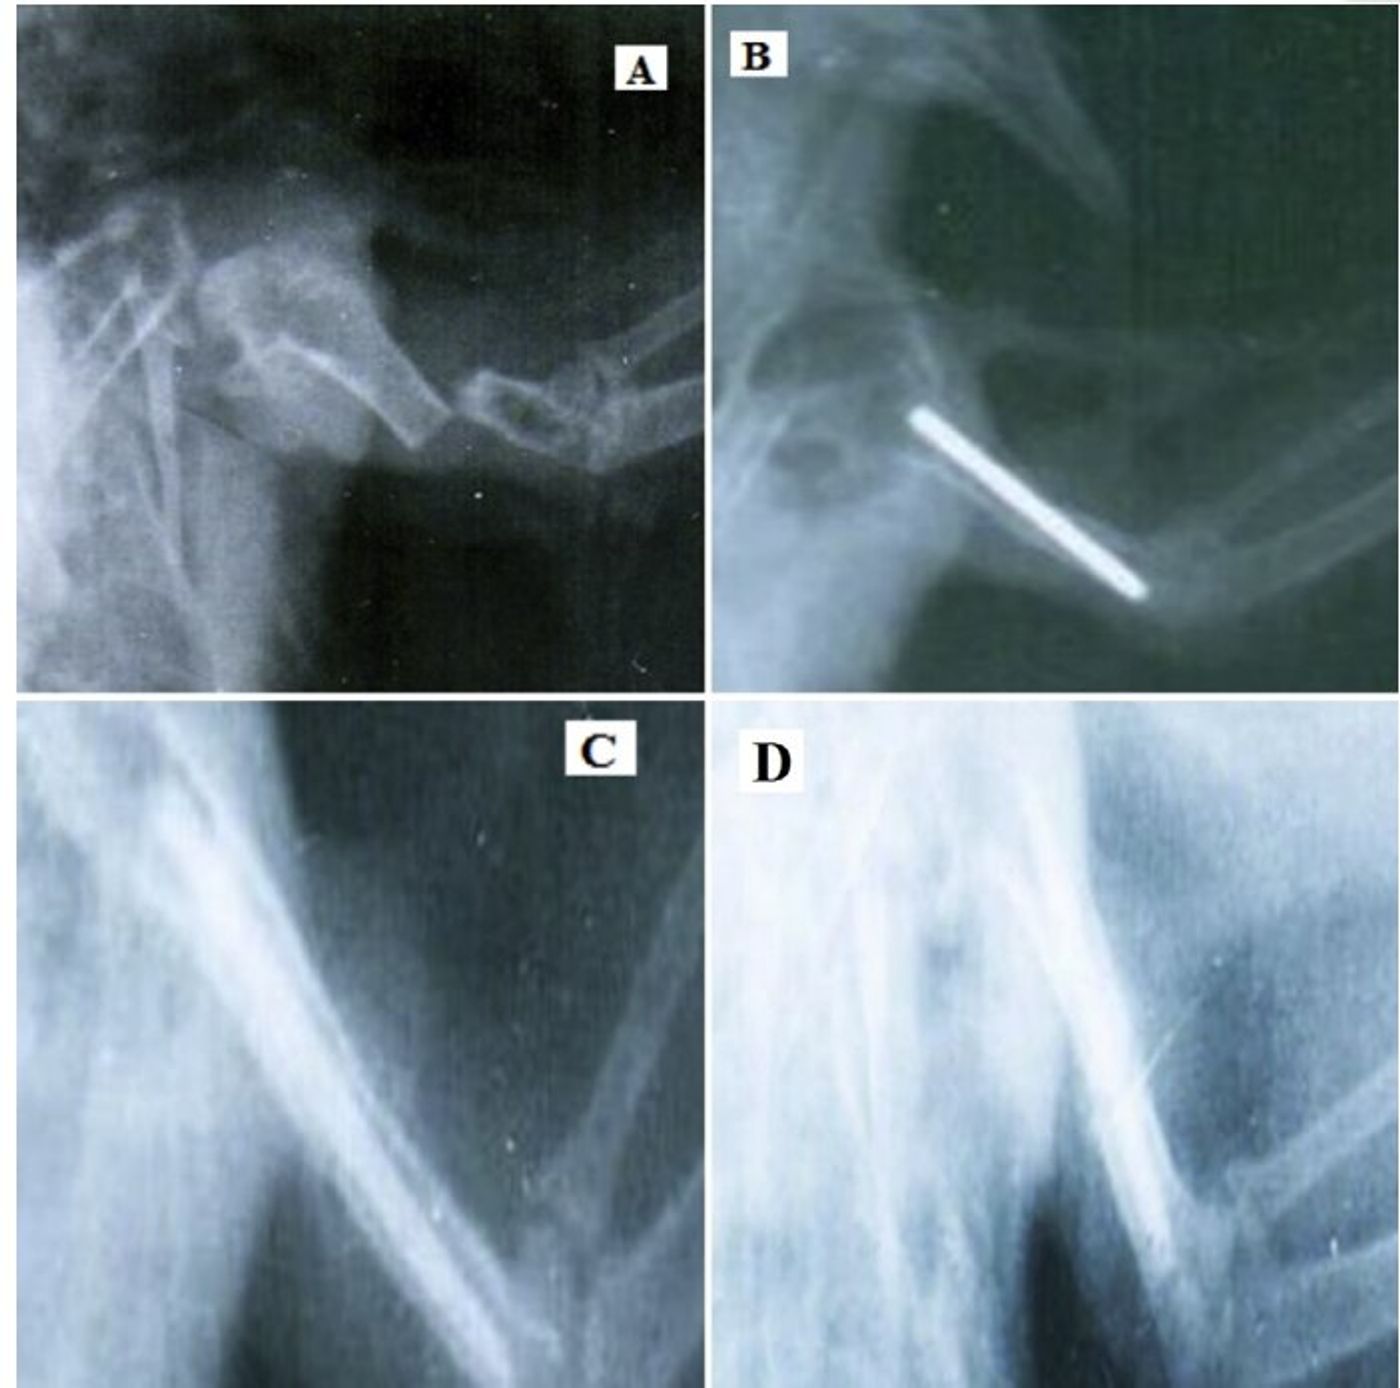 Bone-based pins are used to help brace a bird's fractured wing bone.